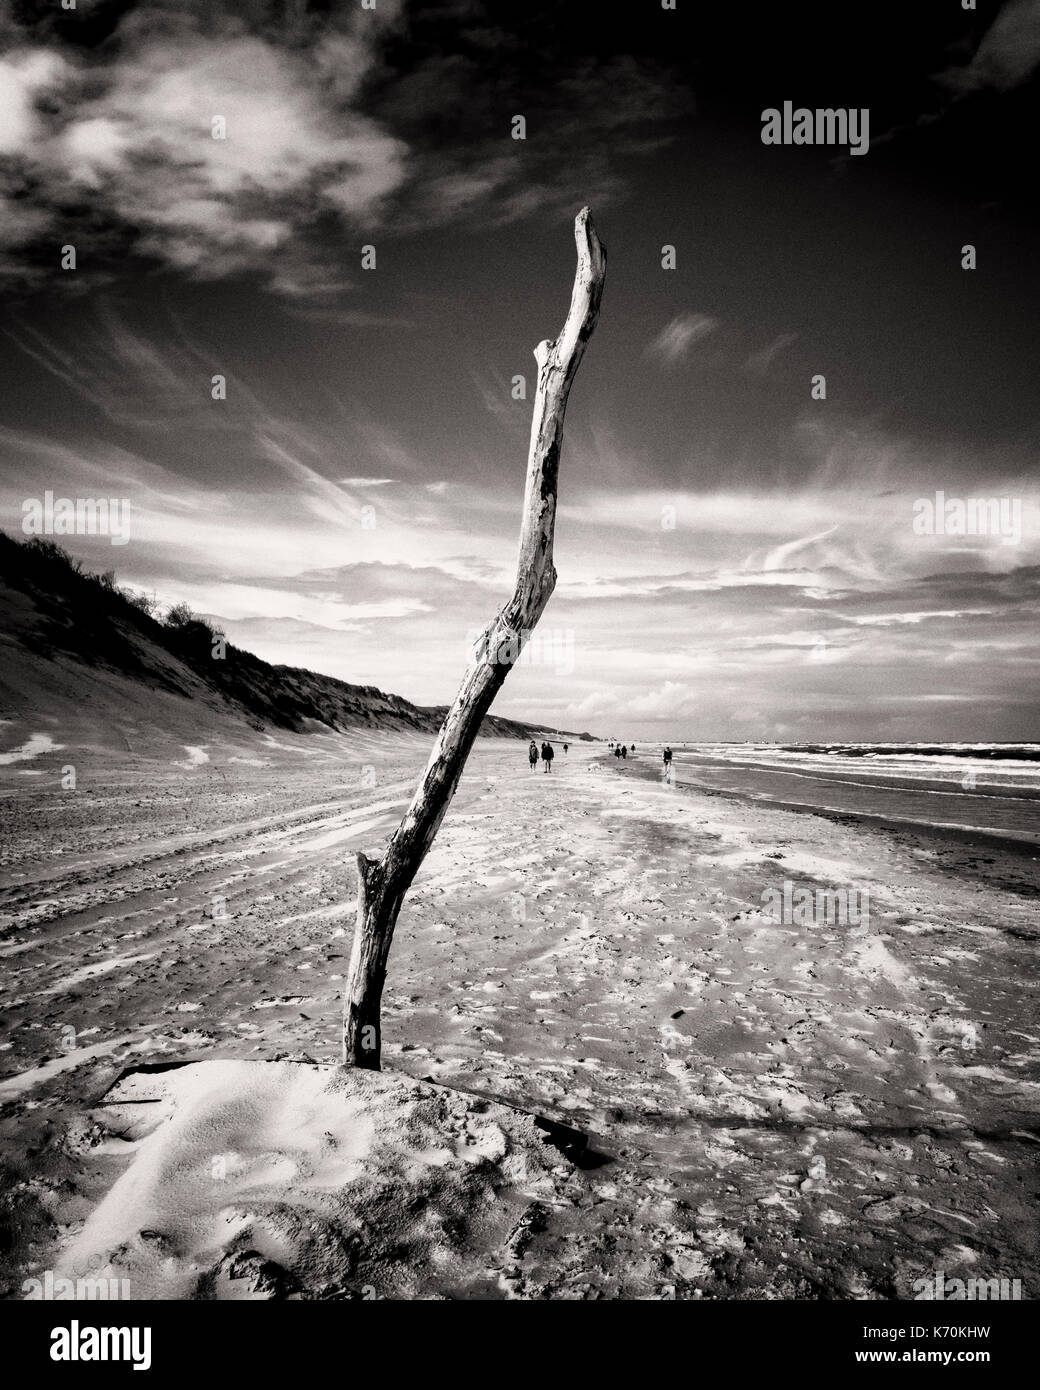 Langeoog, Germany. A piece of driftwood placed in the sand on beach to stand-up tall and prominently against the sky.  View looking along the beach coastline with sand dunes on one side and the see on the other.  Tourists appear tiny in the distance as they walk along the sandy beach. Stock Photo